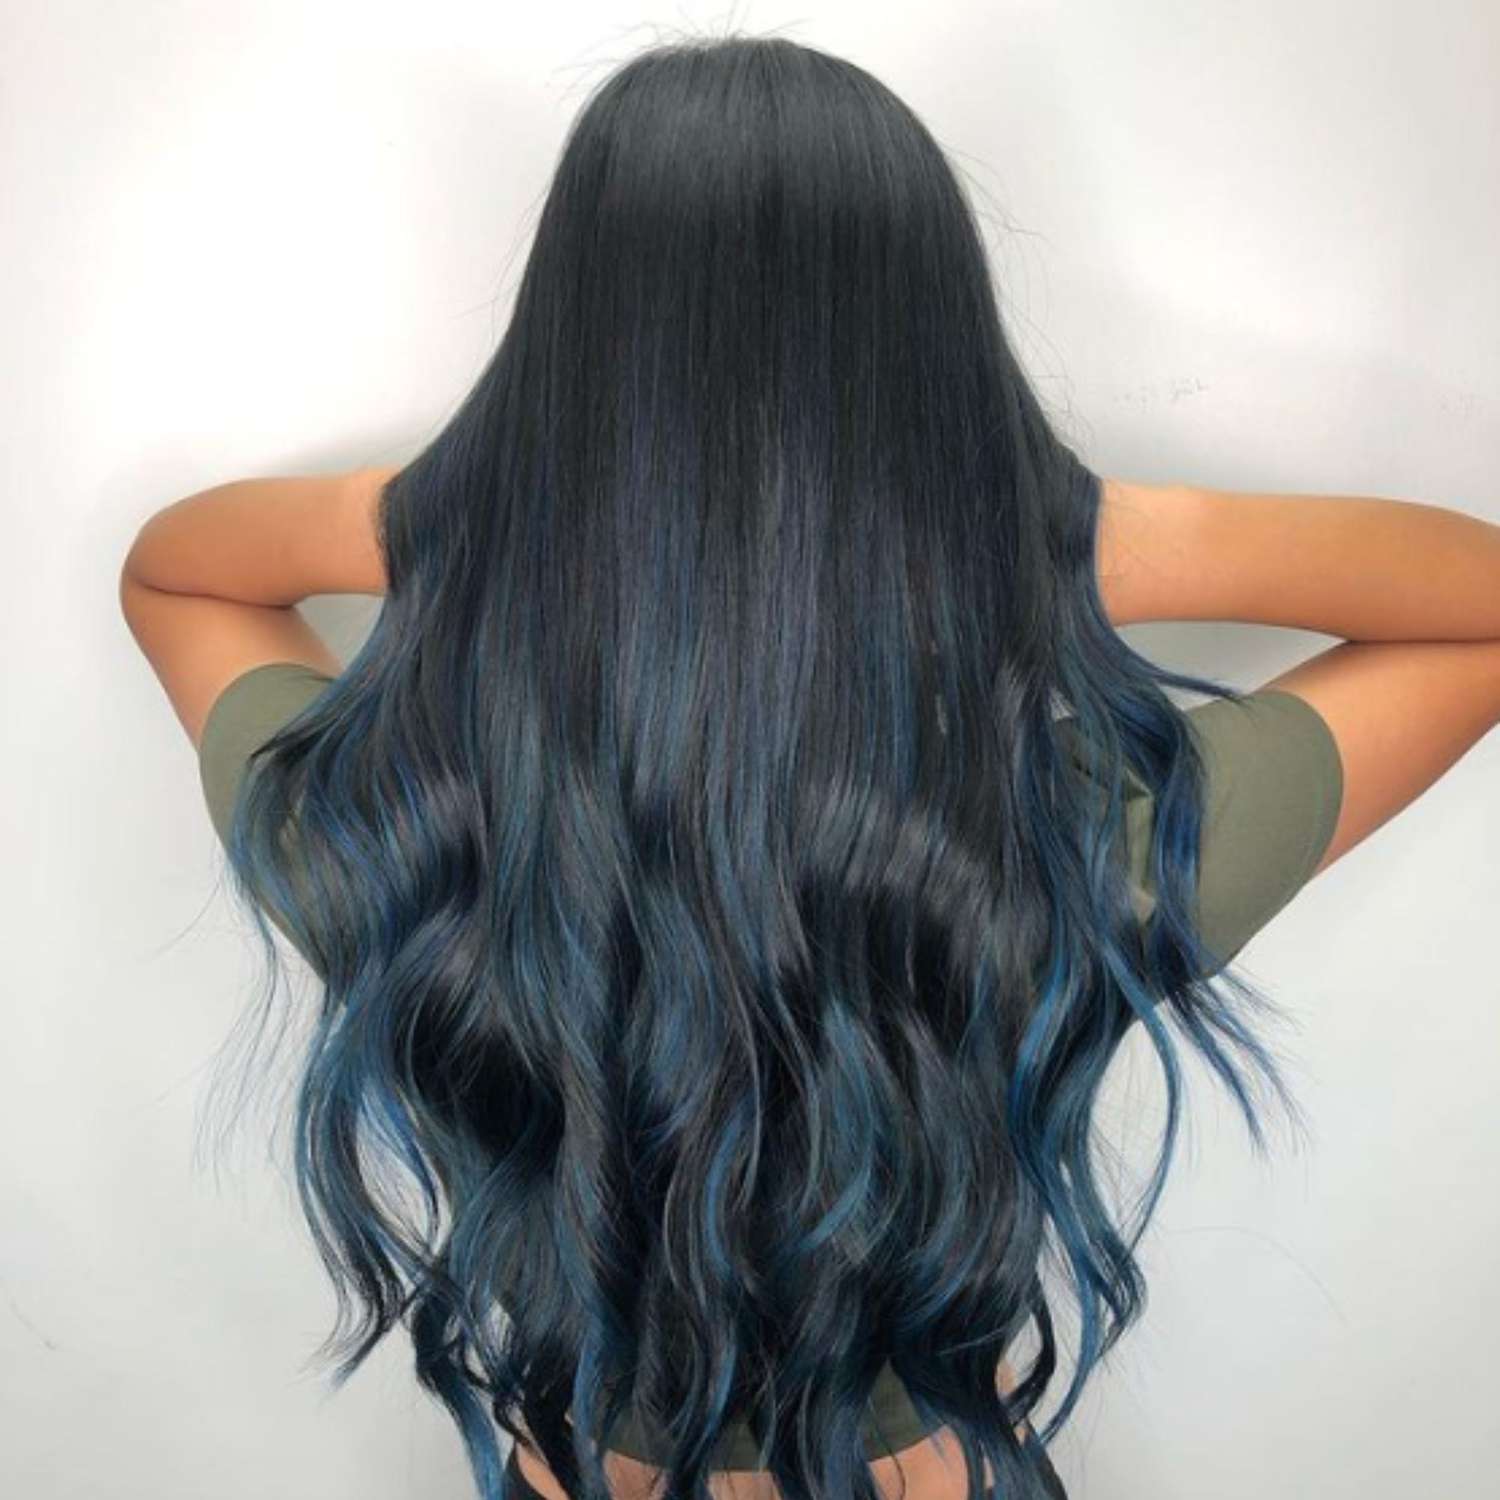 Black hair with blue subtle highlights and ends